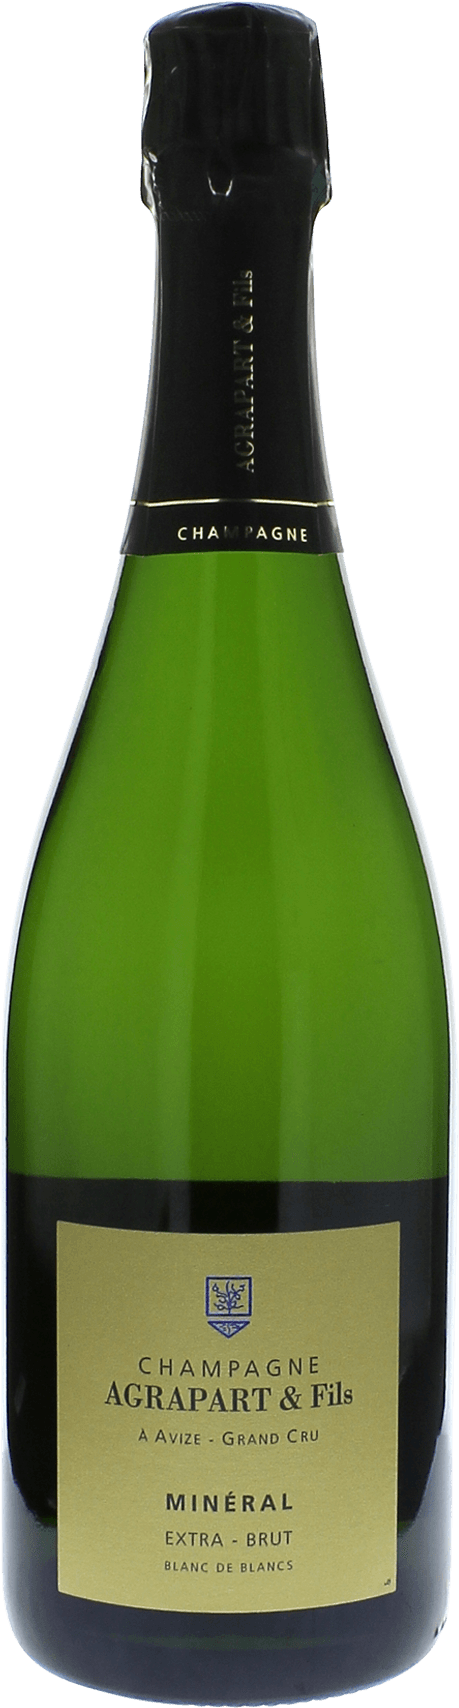 Agrapart  mineral extra brut blanc de blancs 2009  Agrapart, Champagne